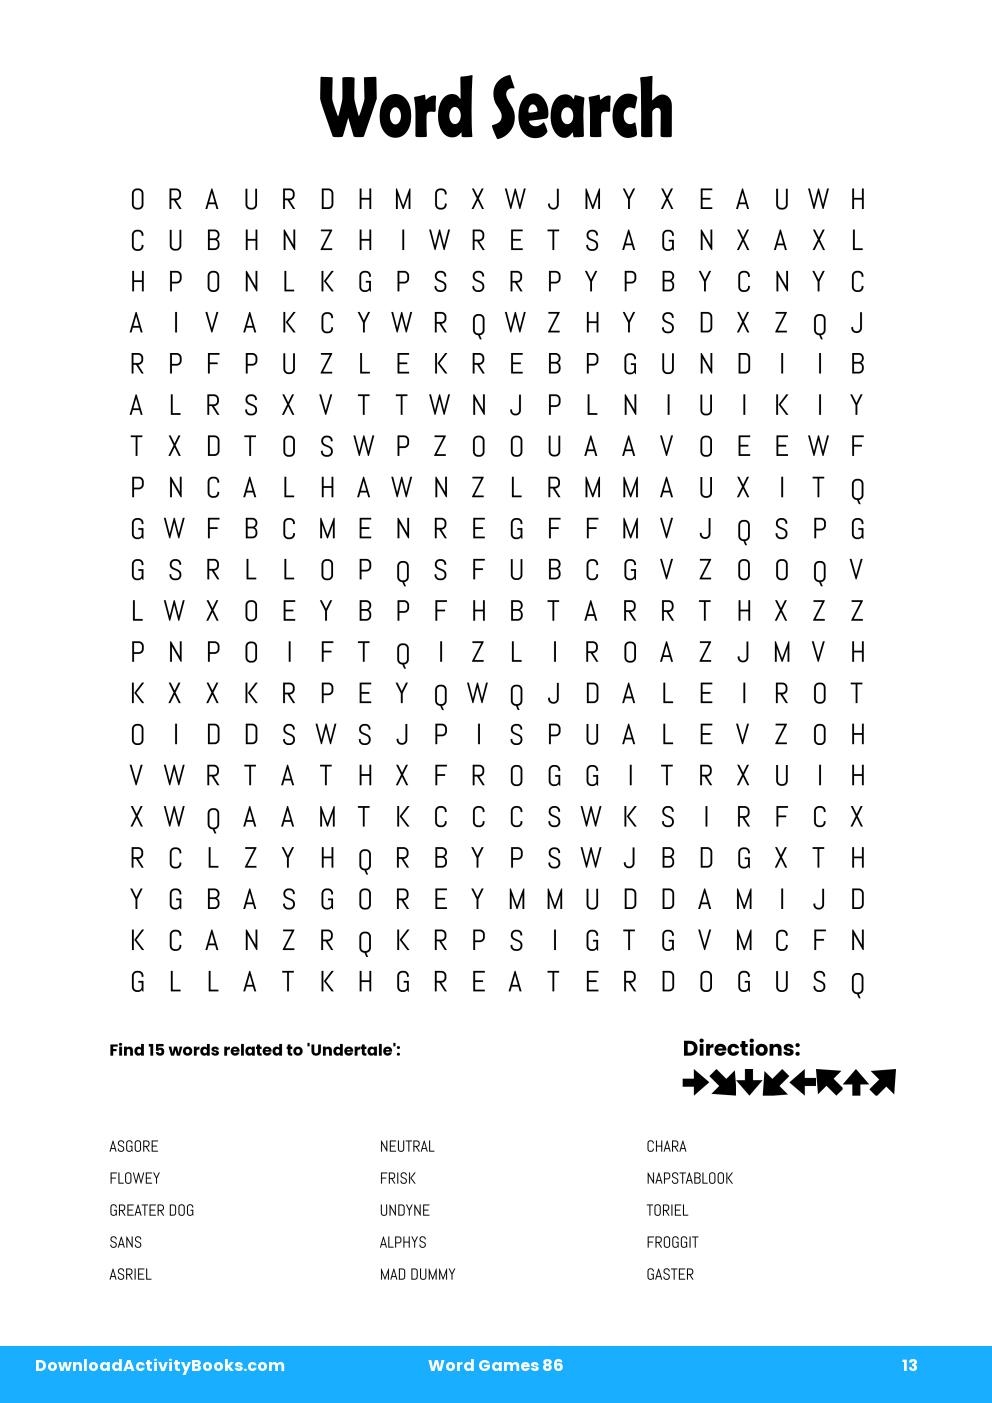 Word Search in Word Games 86